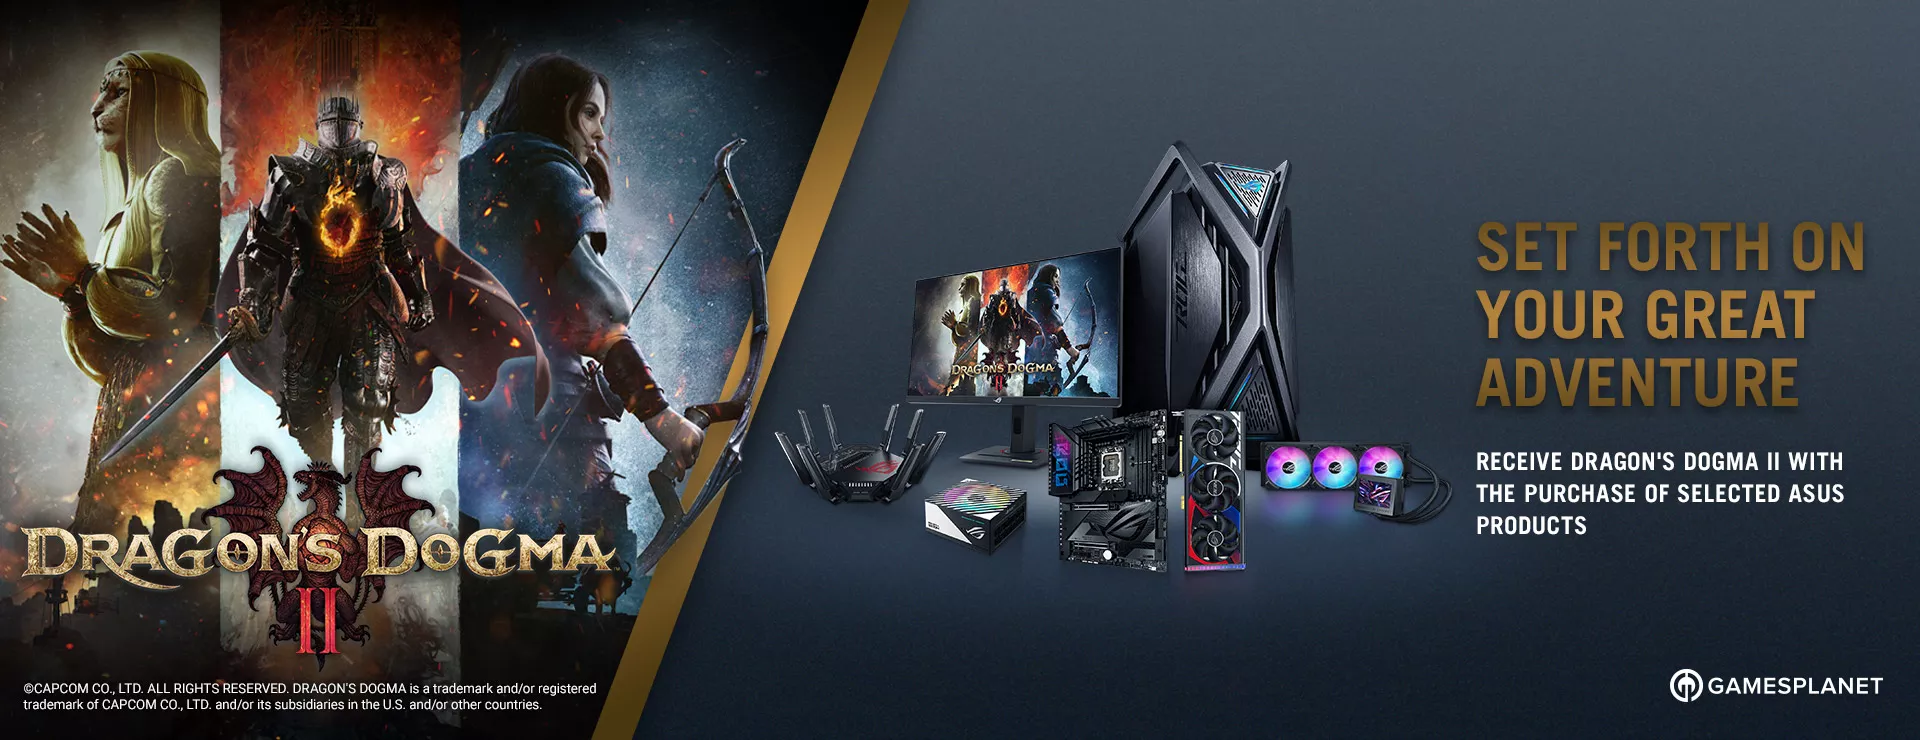 Buy eligible ASUS products and receive Dragon's Dogma II!